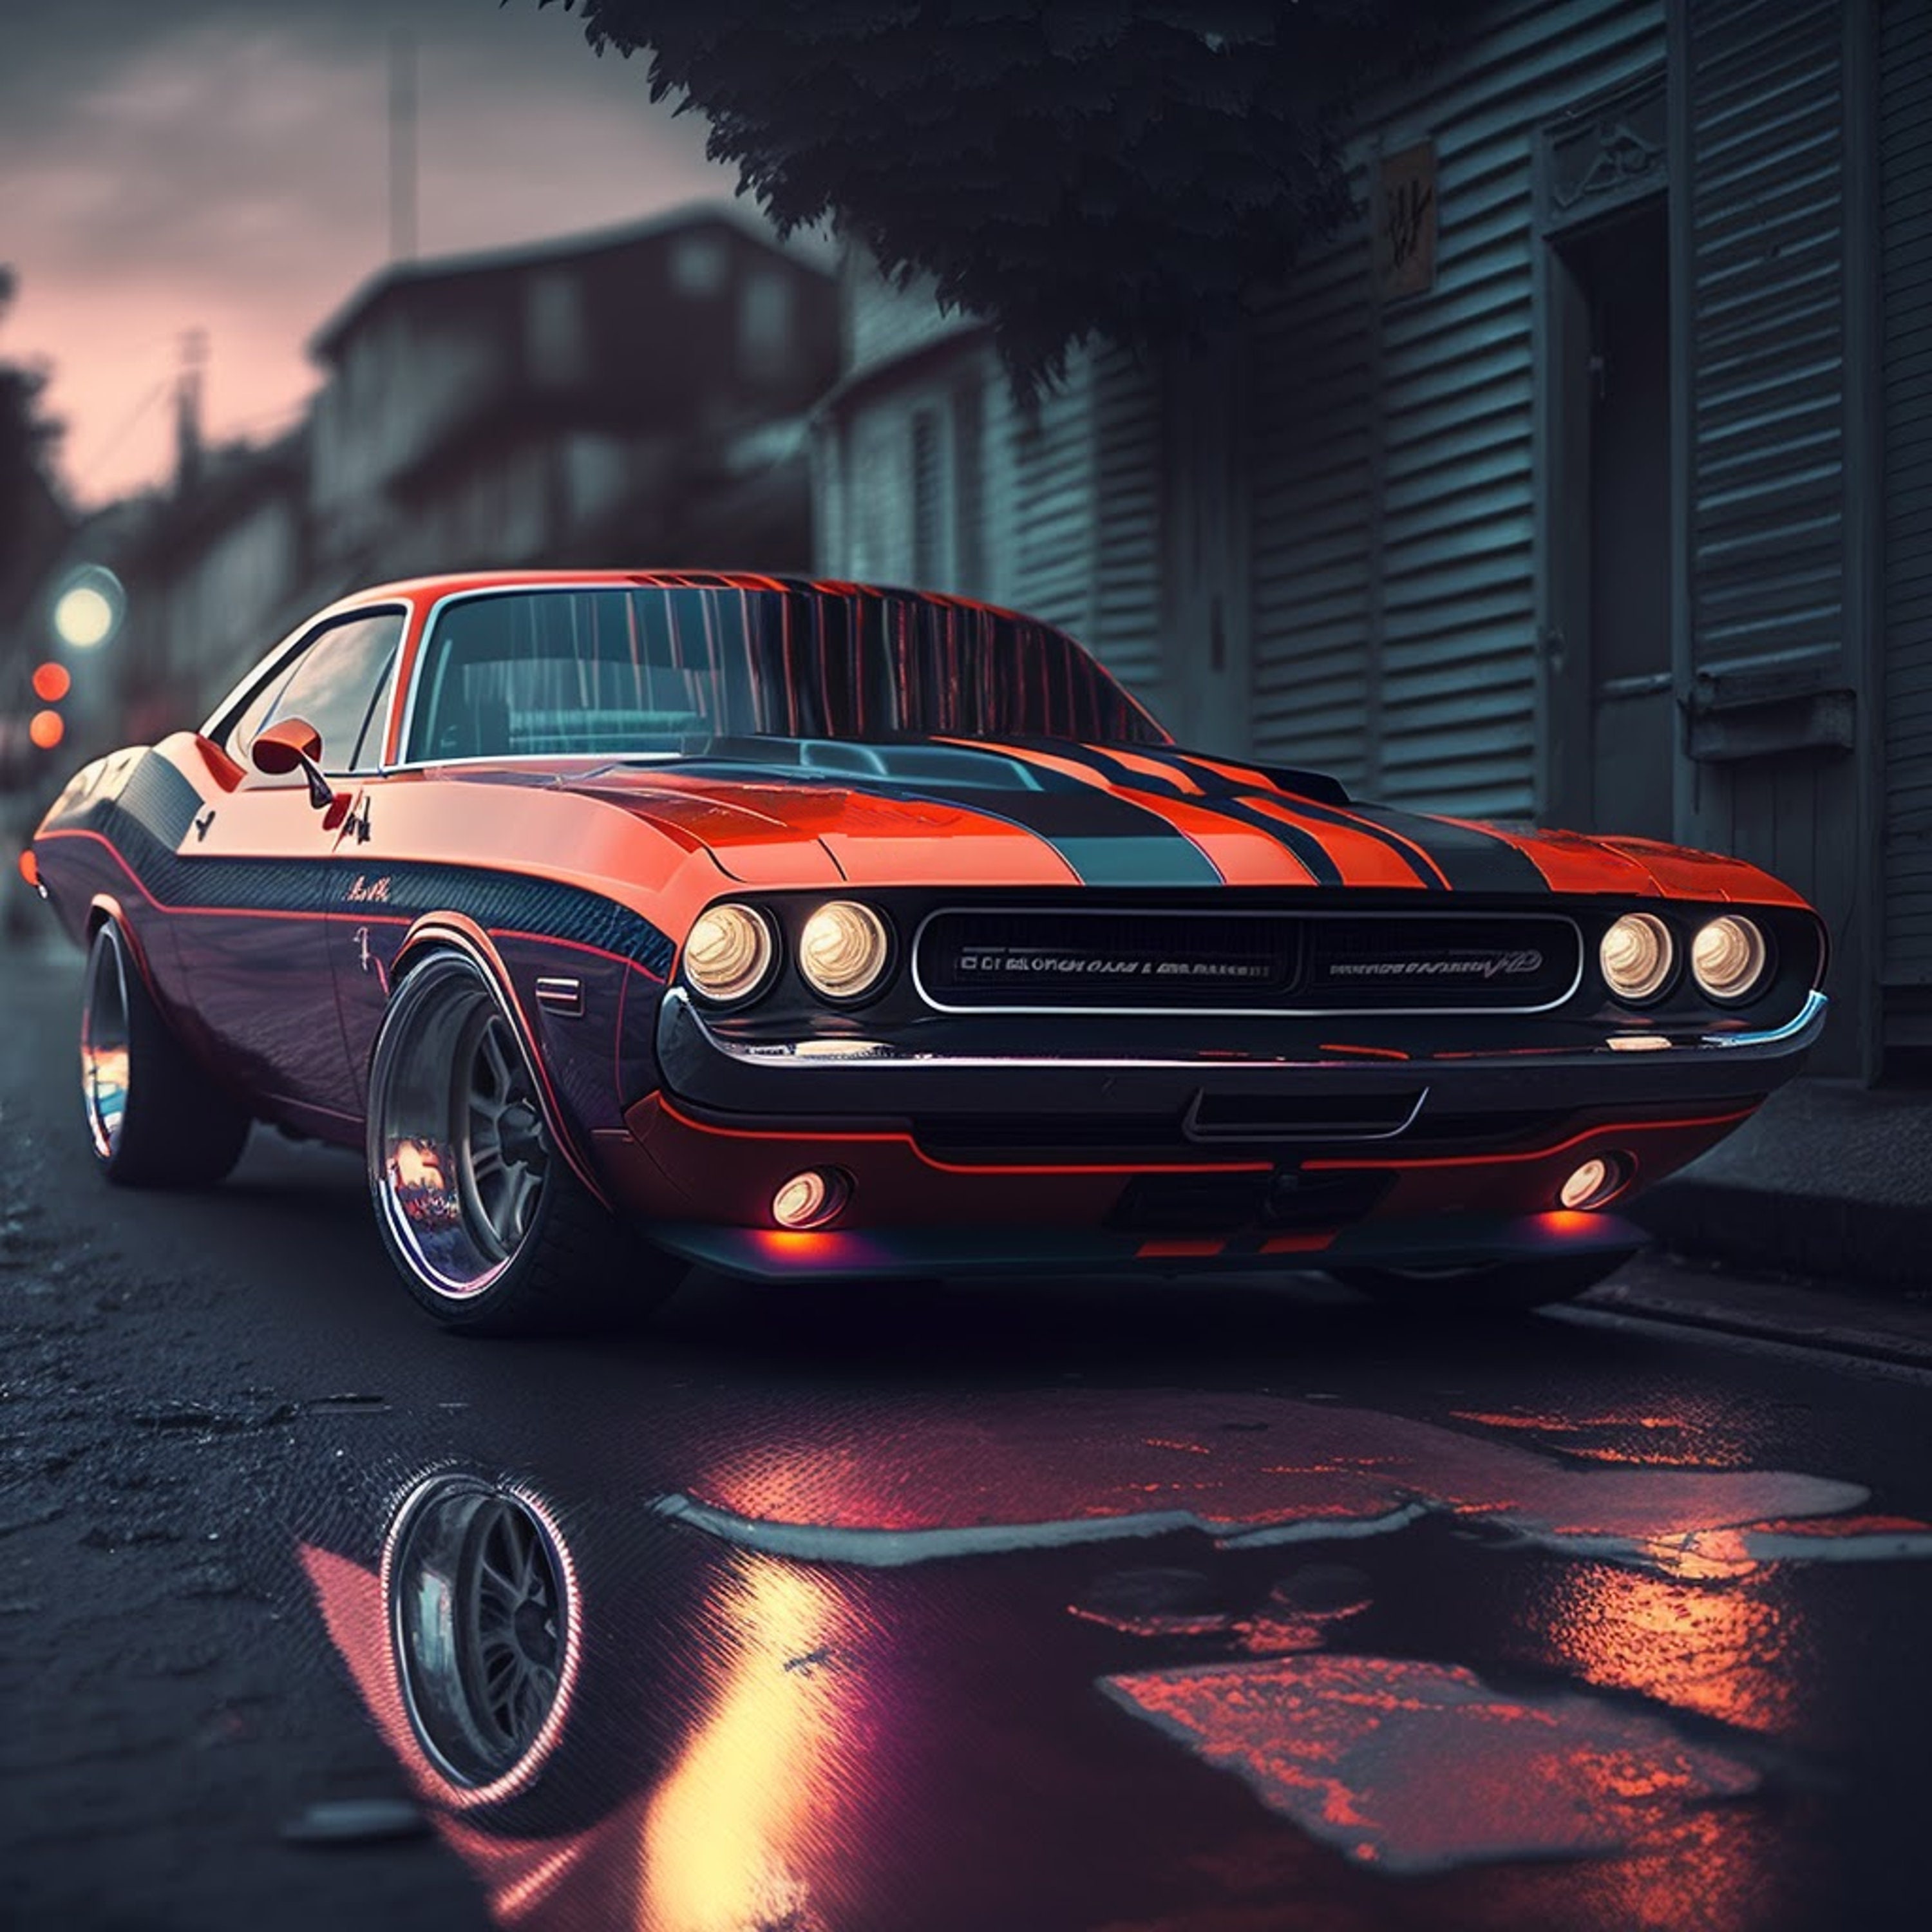 Dodge Challenger Tuning Desert Car Auto Poster  Car wallpapers, Classic  cars muscle, Old muscle cars